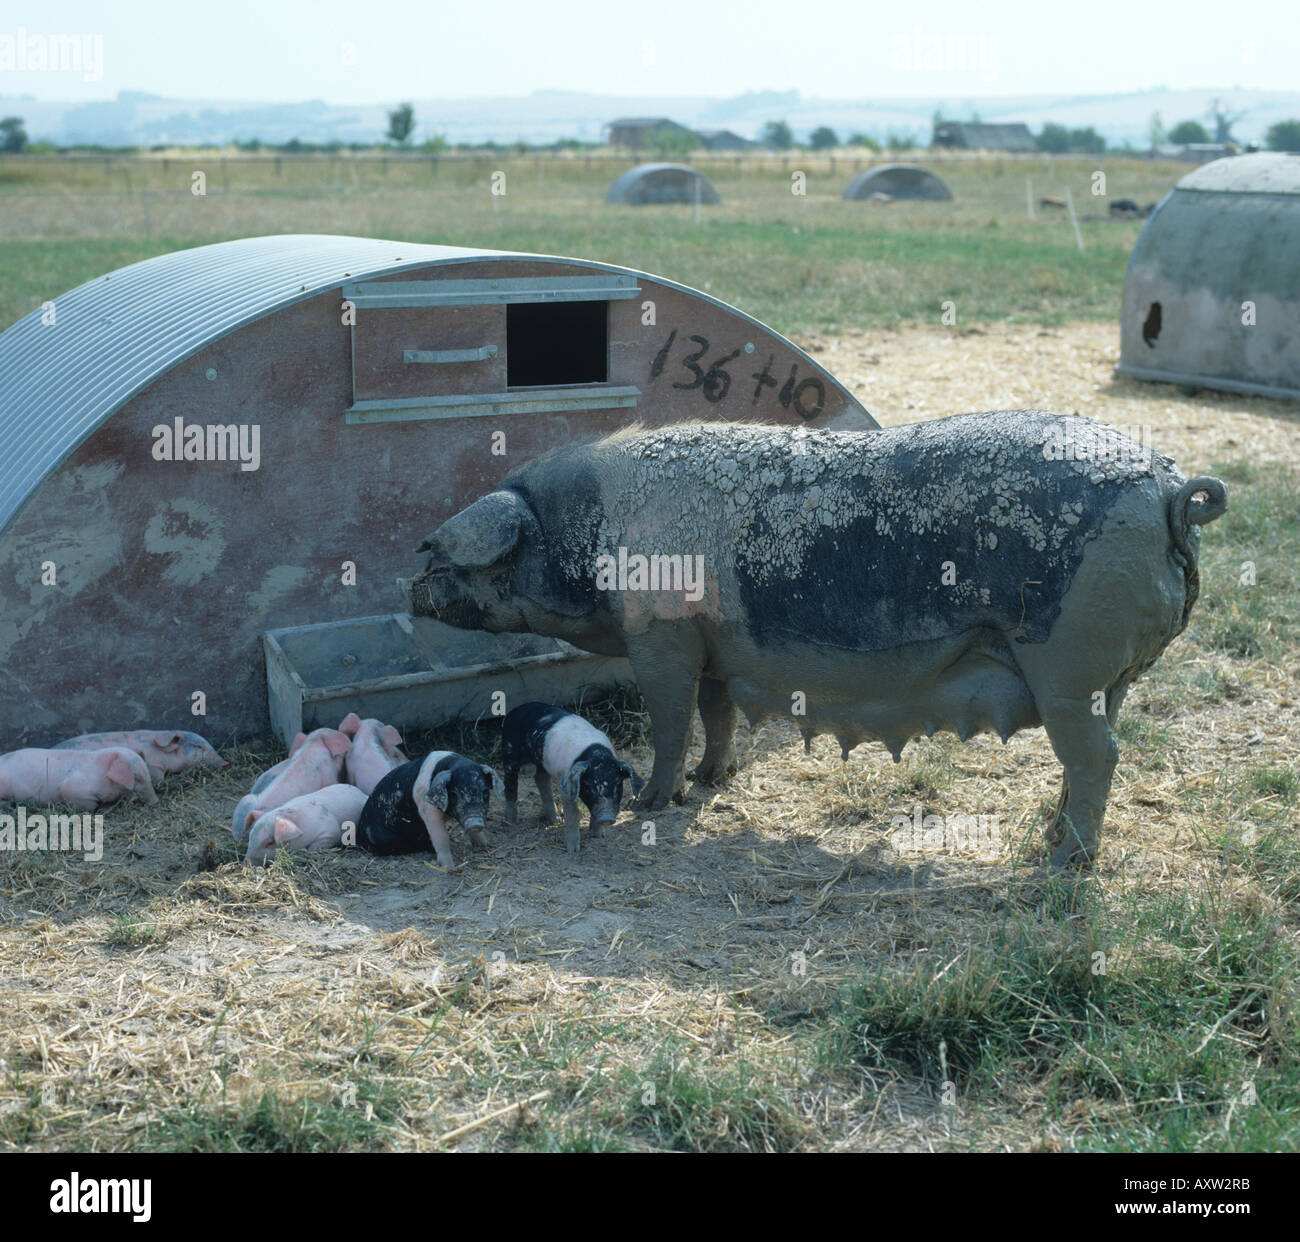 A saddleback sow with her piglets shading behind a pig ark on hot summer day on an organic farm Stock Photo